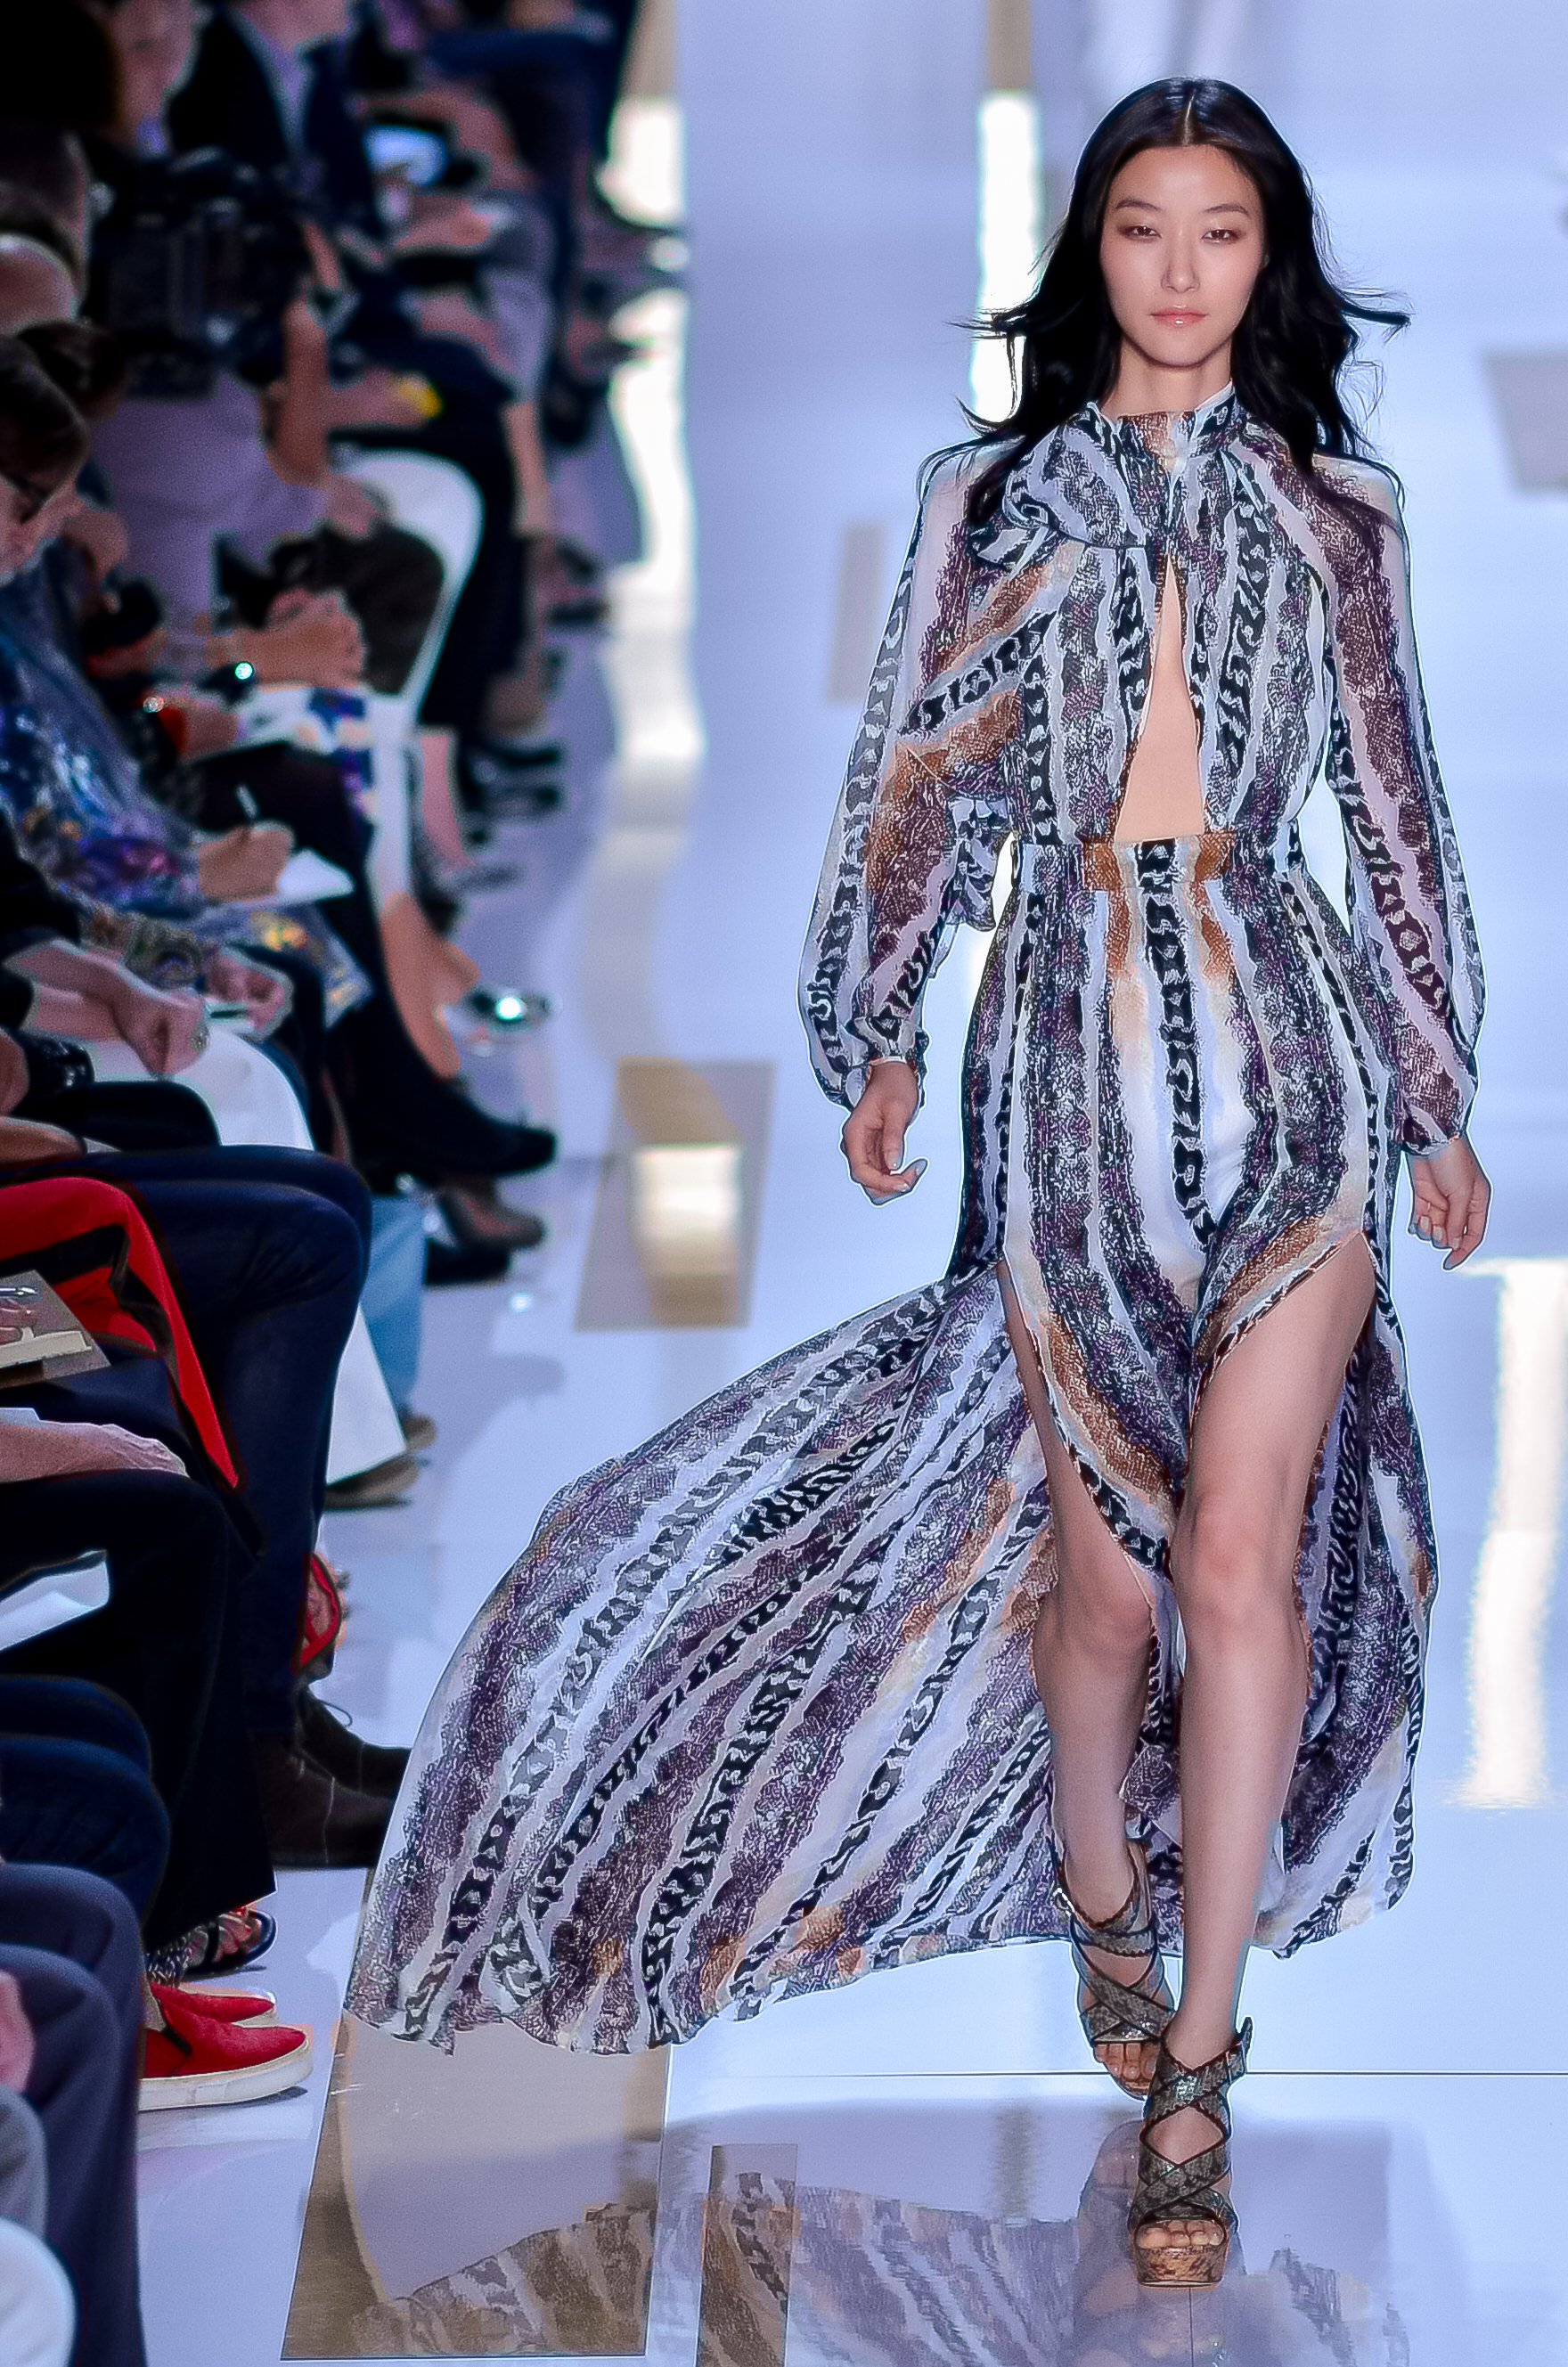 Top 3 Trends Seen at New York Fashion Week